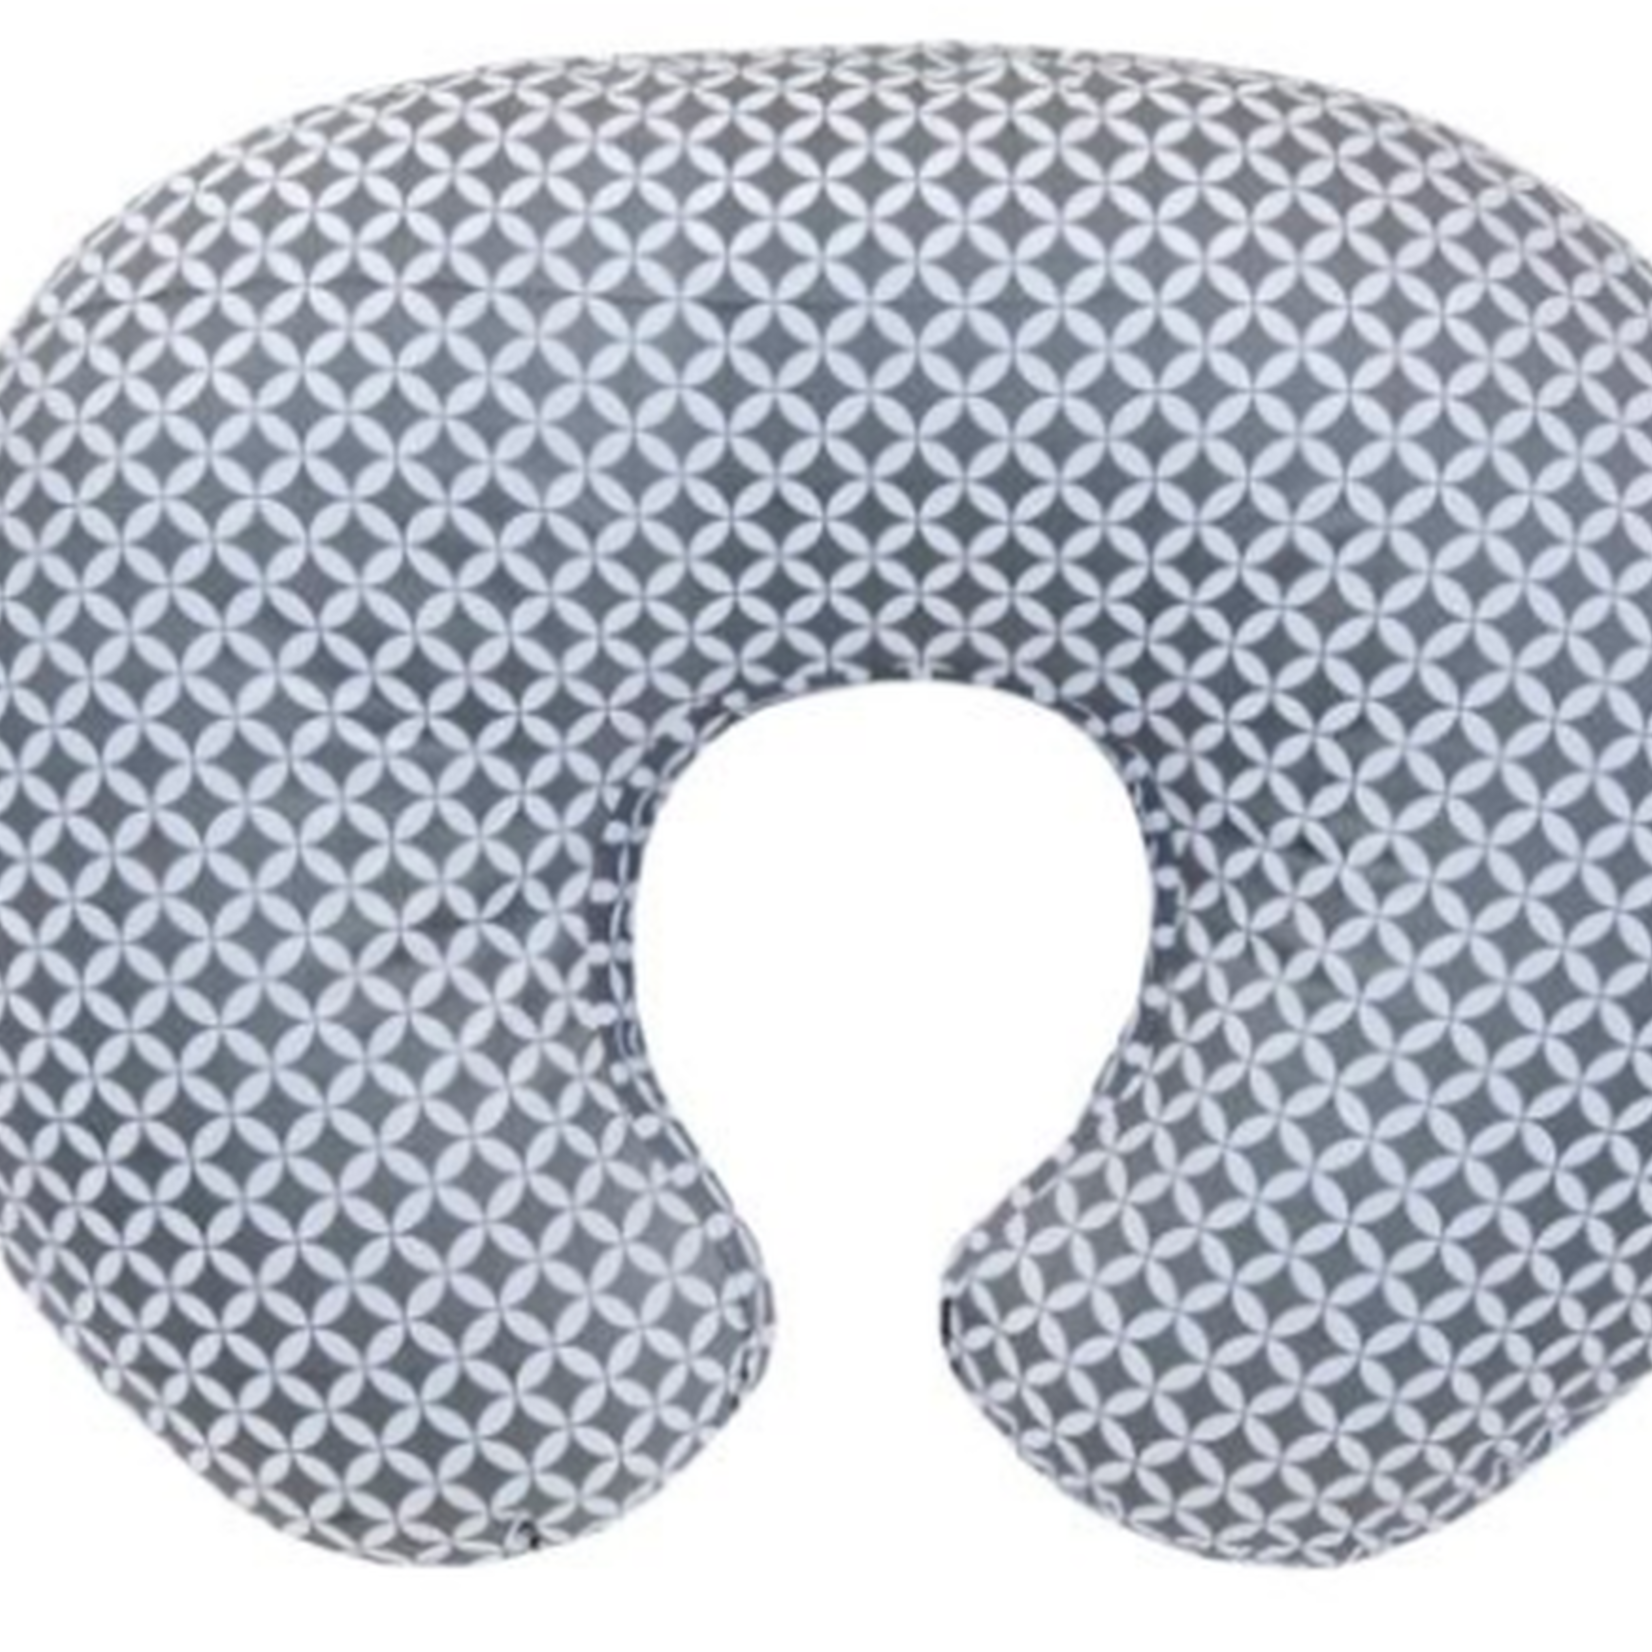 Chicco Boppy Pillow-Charcoal Geo Circles